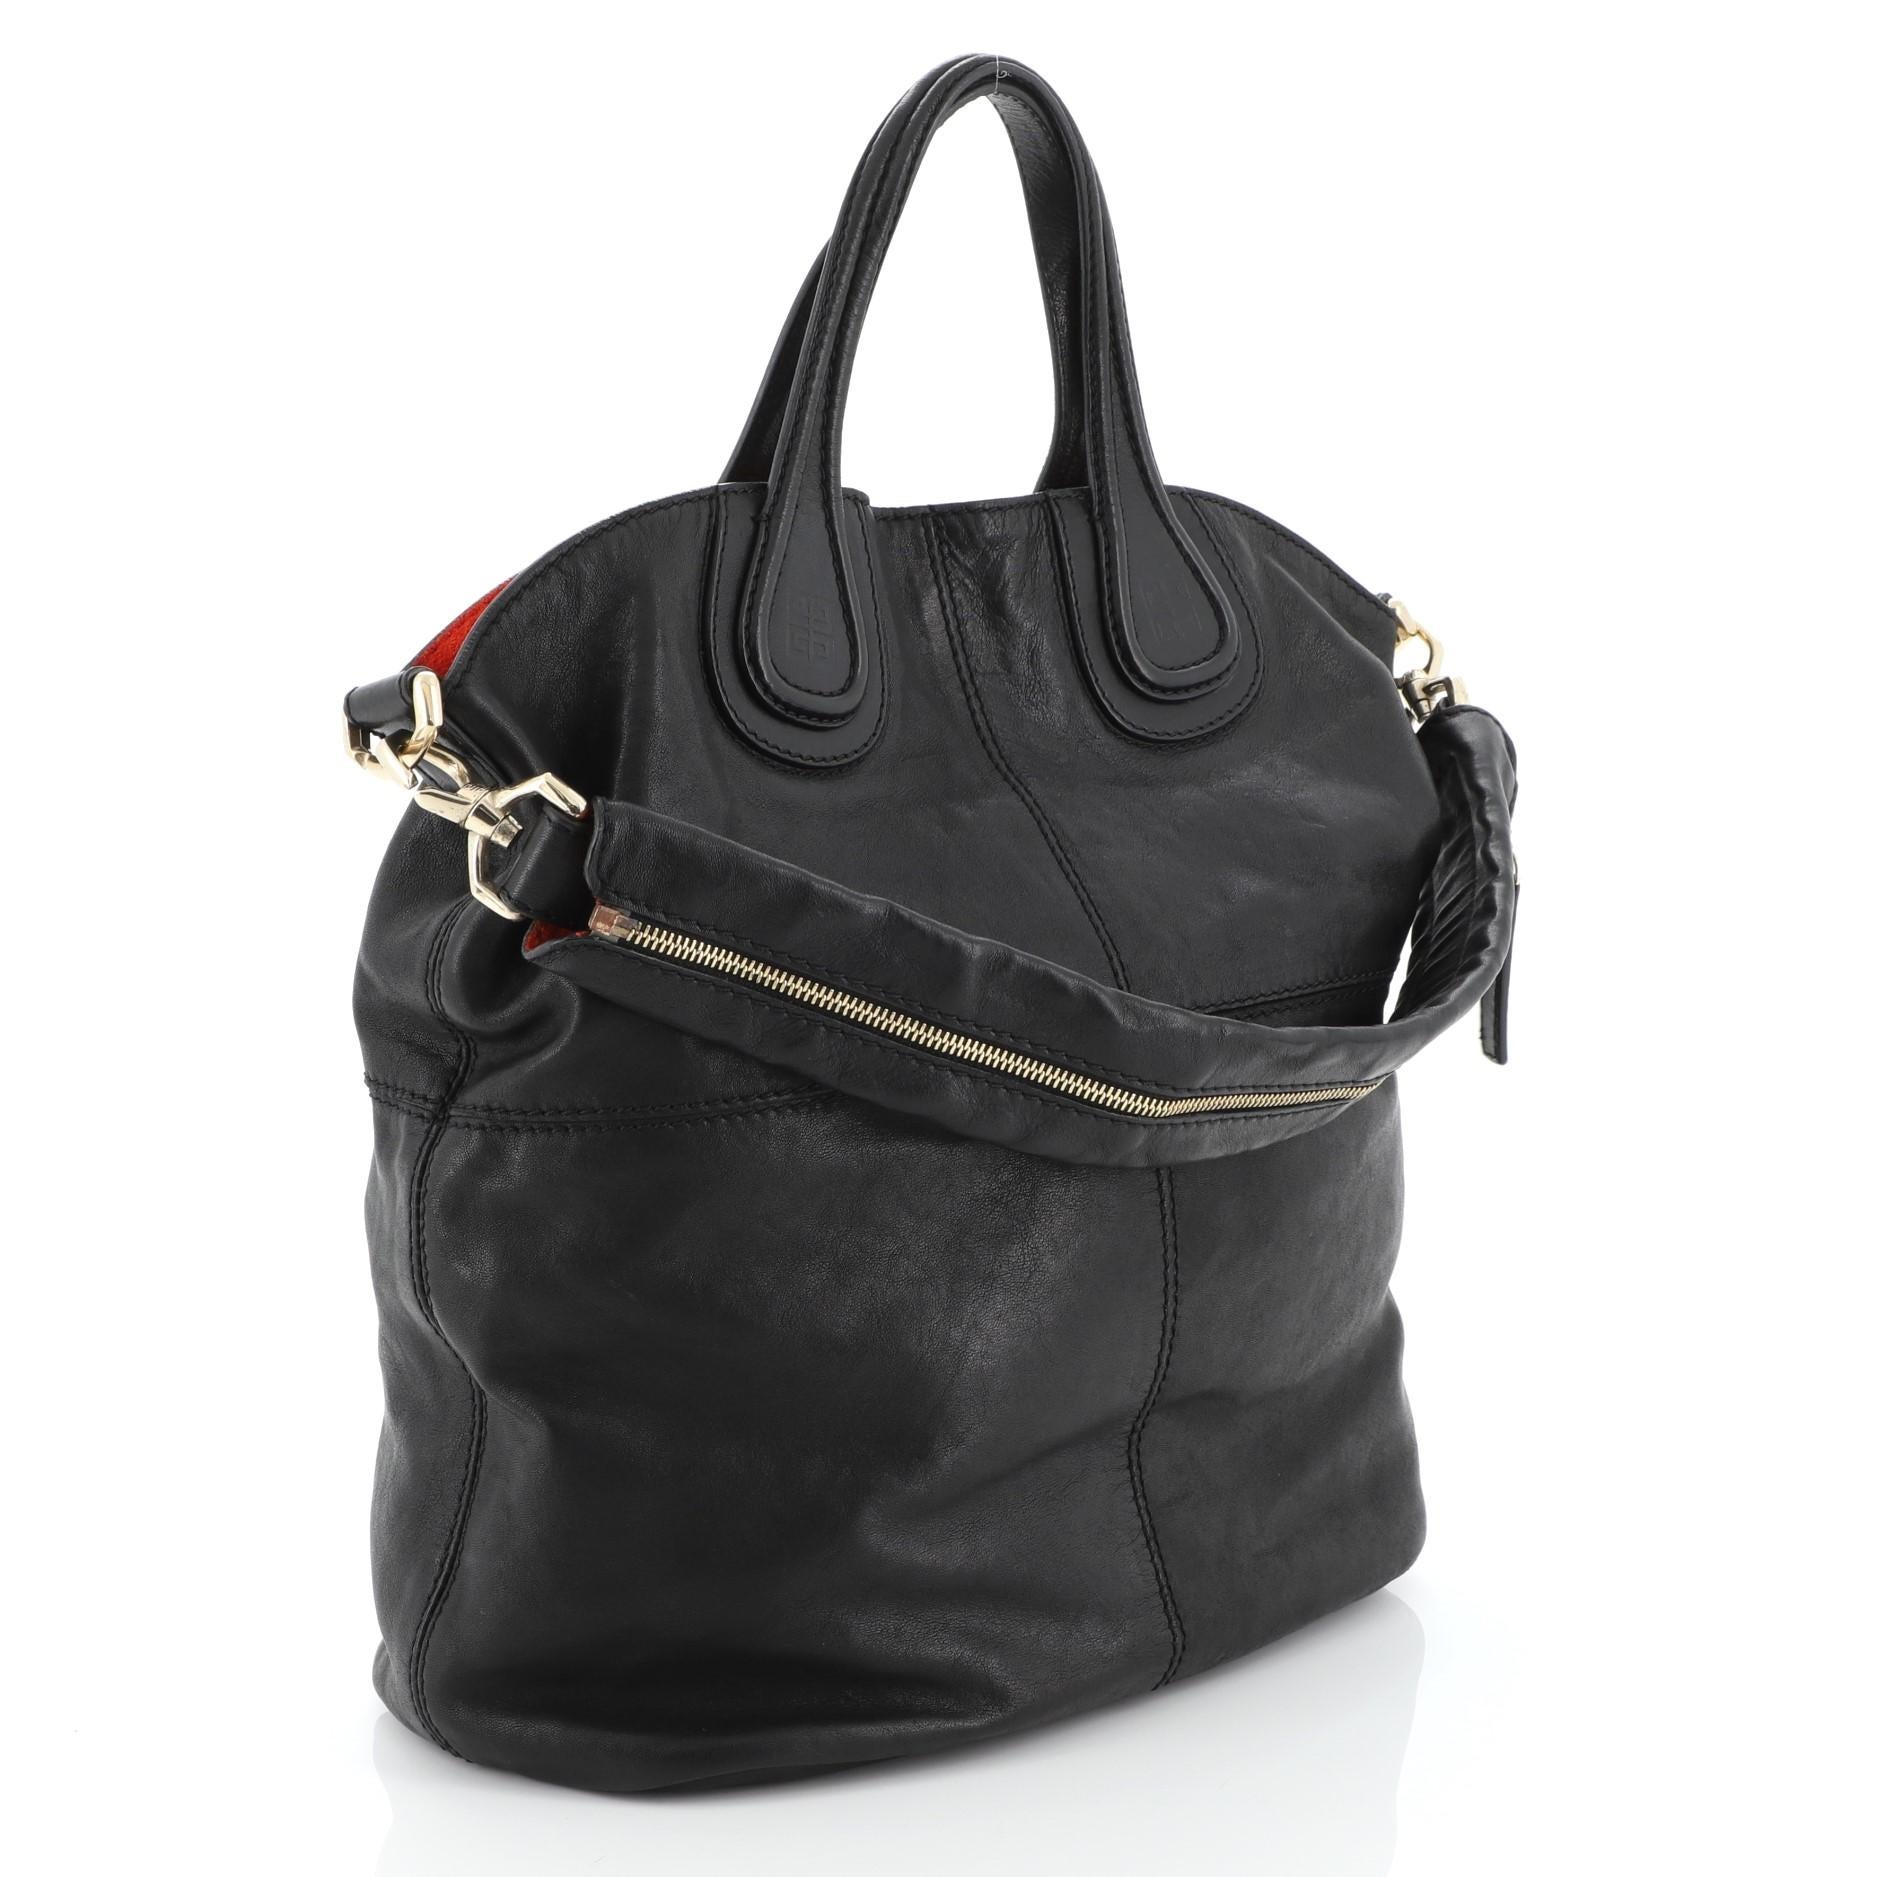 This Givenchy Nightingale Tote Leather Large, crafted in black leather, features dual top handles with embossed Givenchy logo, stitched quarters, and gold-tone hardware. Its hidden magnetic closure opens to a black fabric interior with zip and slip